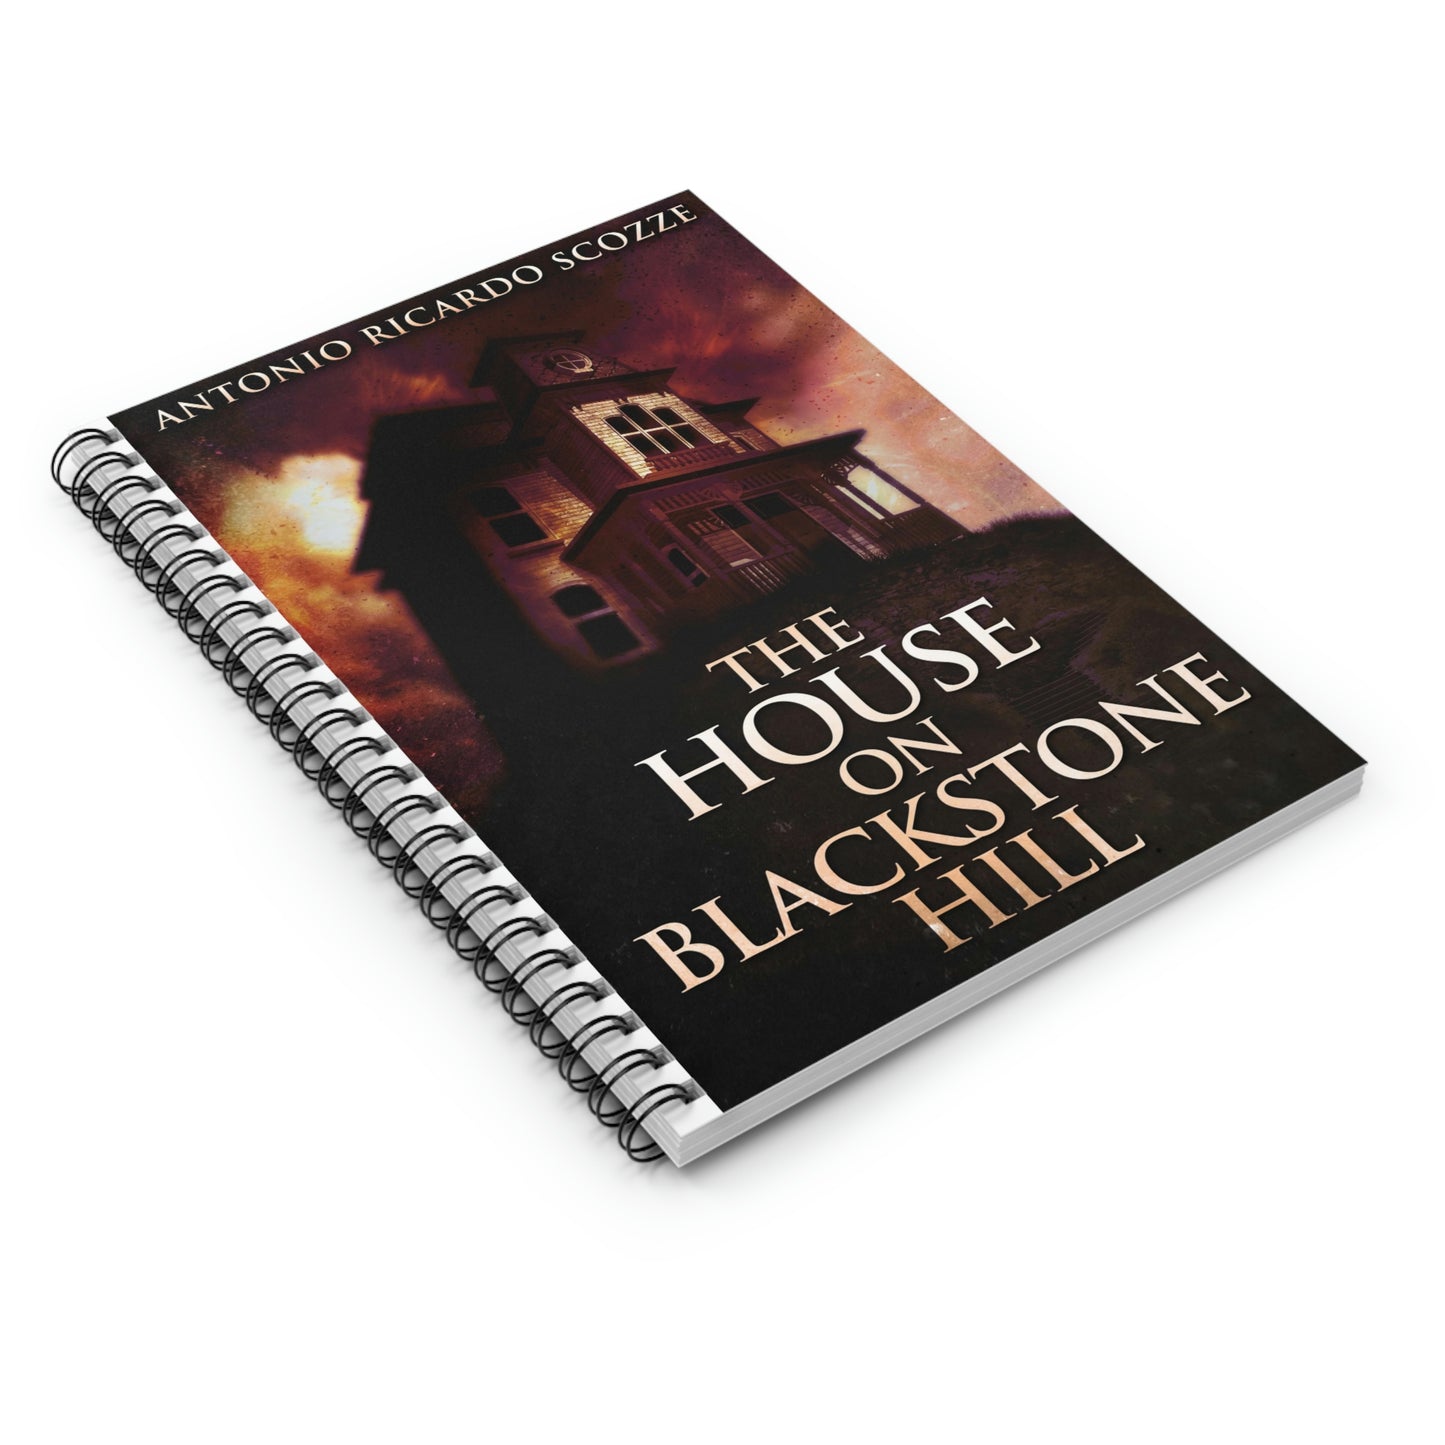 The House On Blackstone Hill - Spiral Notebook